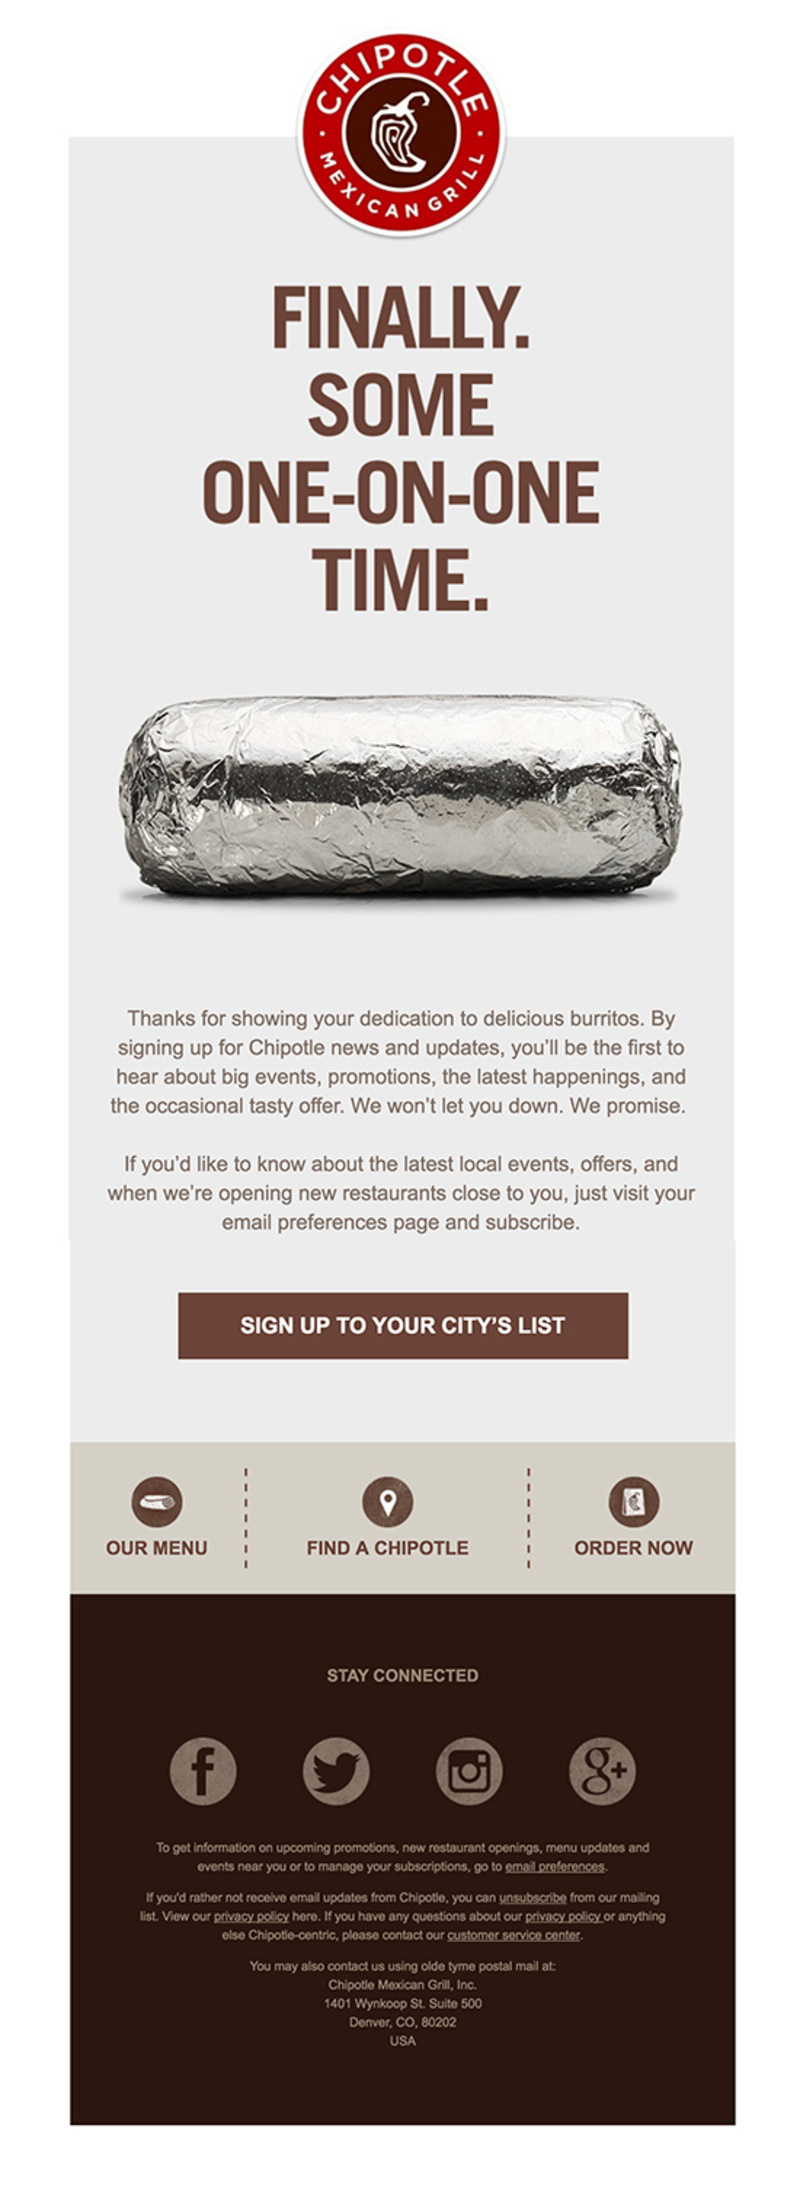 Example Email From Chipotle With a Picture of a Huge Burrito Wrapped